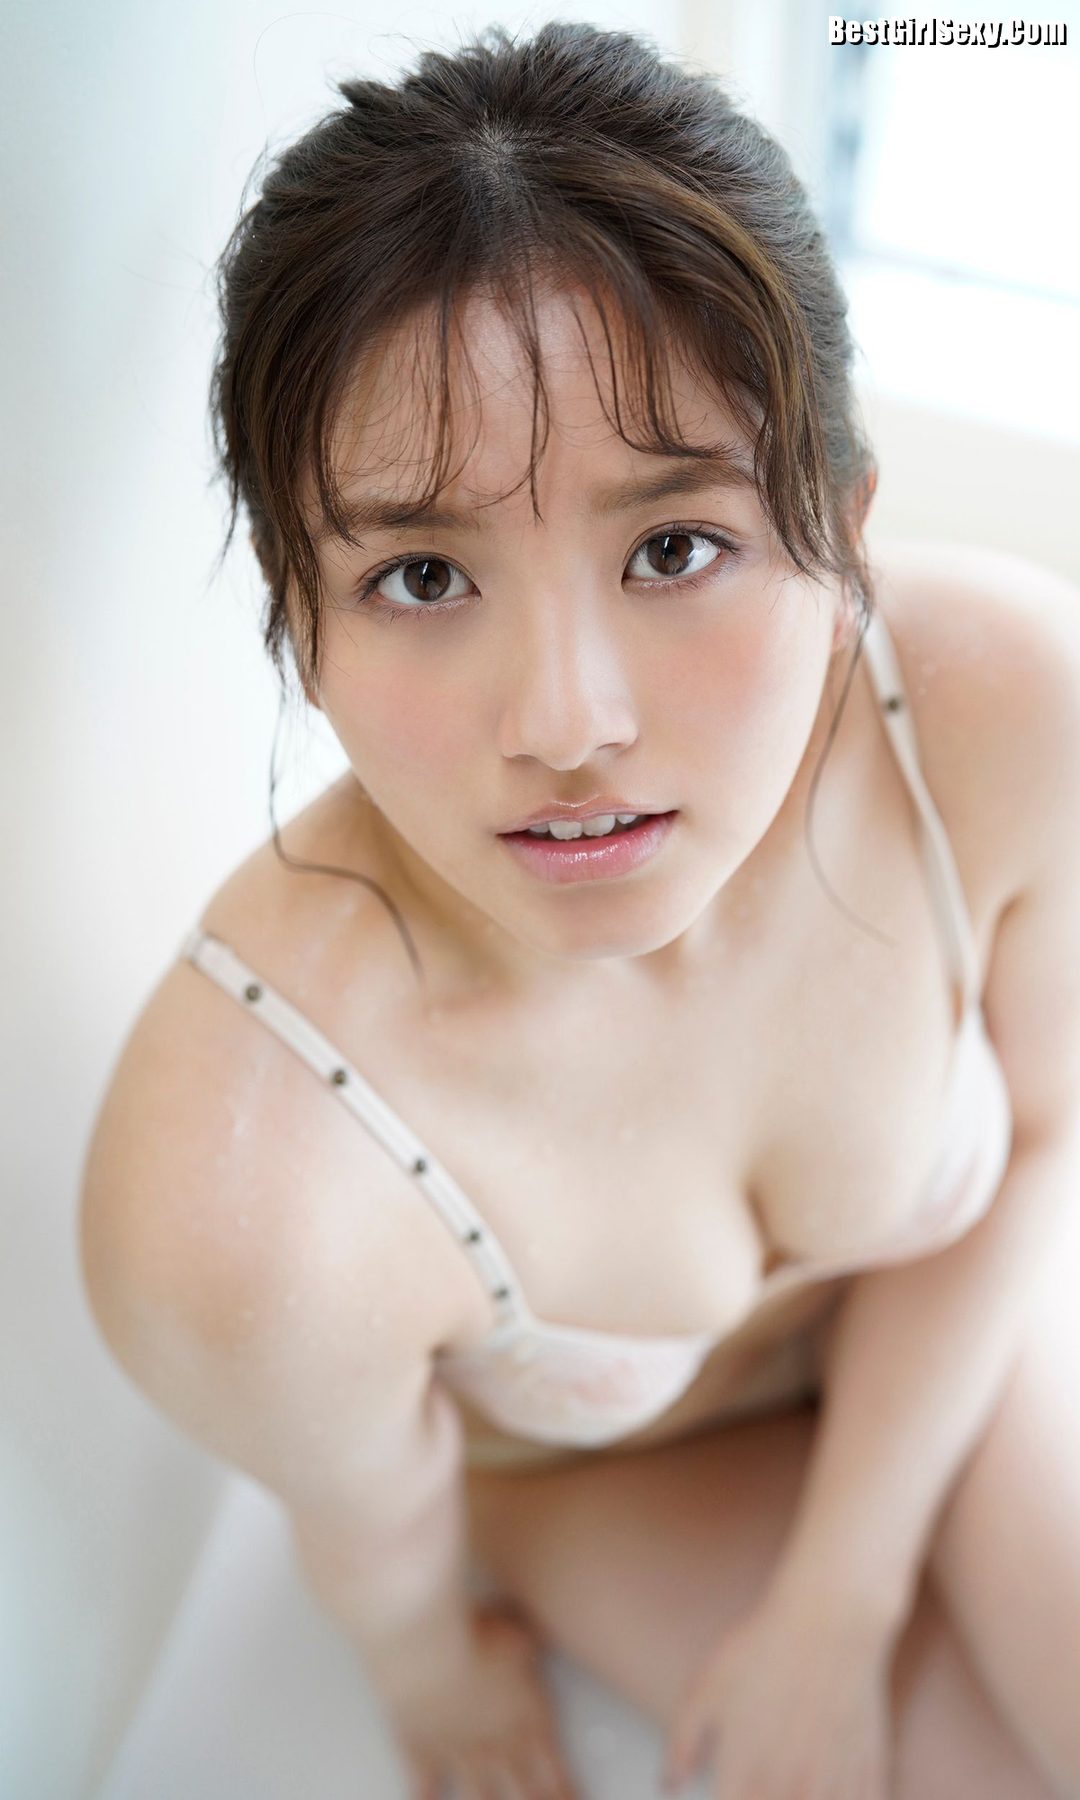 Digital Limited Owada Nana 大和田南那 The Other Side Of That Door 0025 8964021637.jpg